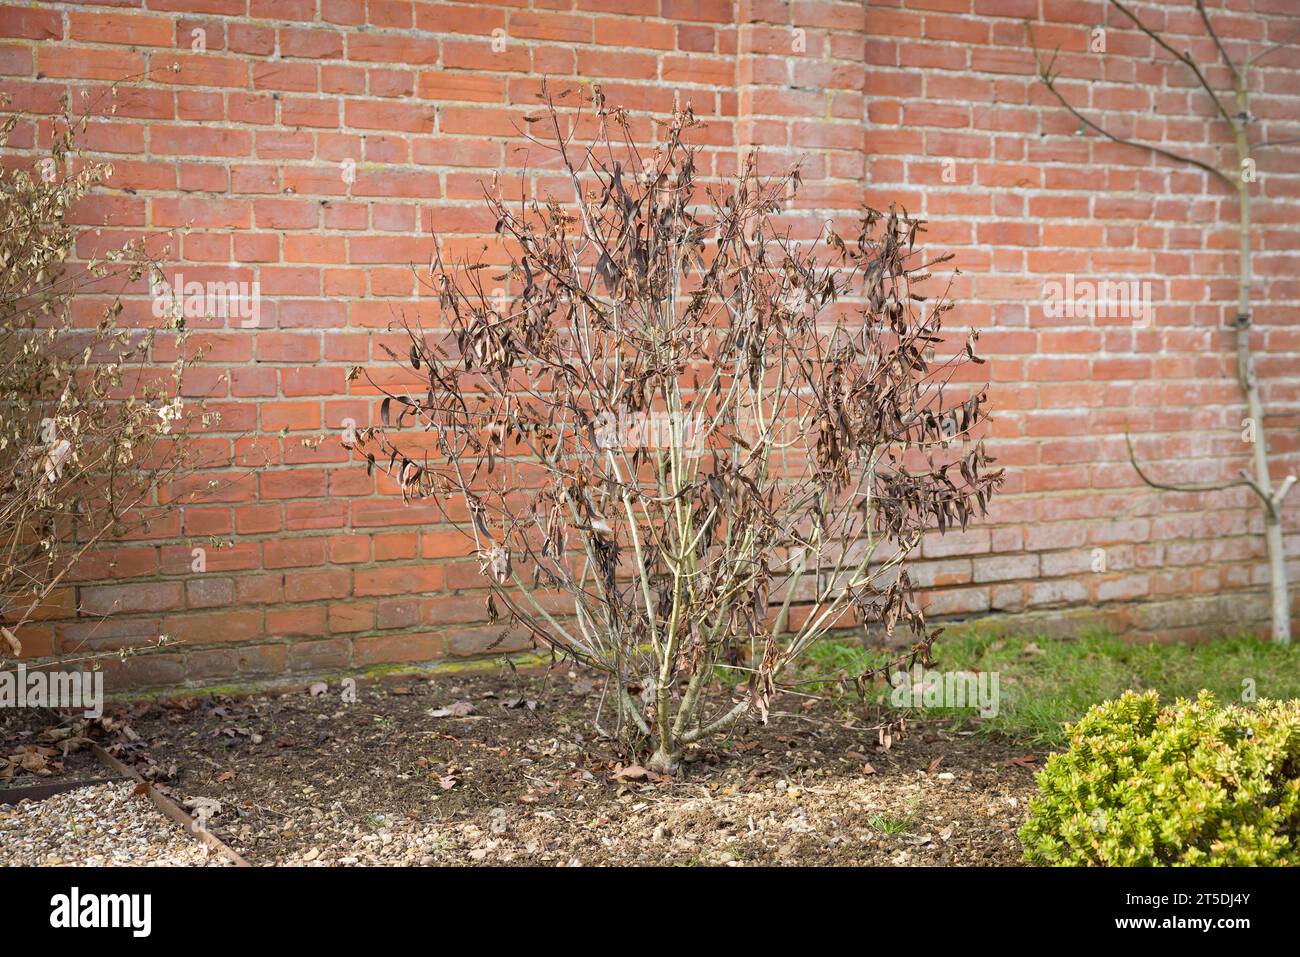 Dead plant due to cold weather. Hebe shrub or bush with frost damage and dead leaves. UK garden in winter Stock Photo